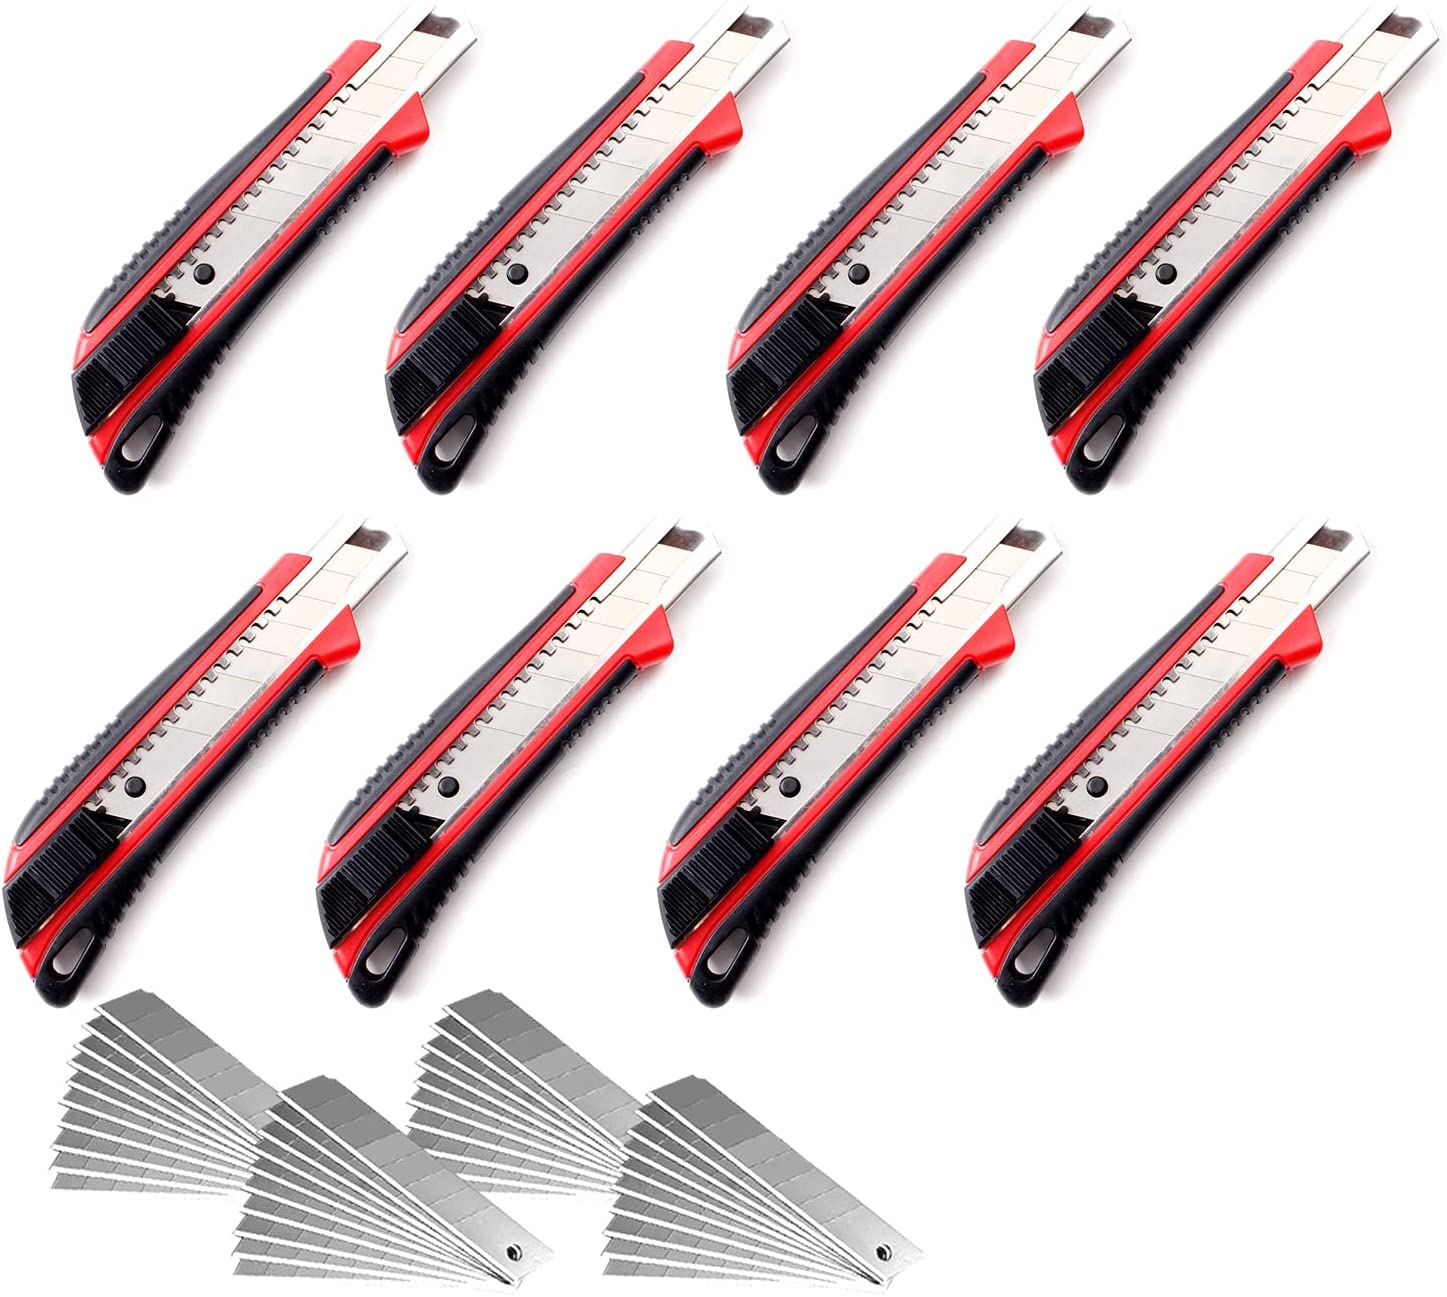 CCLIFE Pack of 8 cutting knives, 18 mm, carpet knife with safety lock including 50 replacement blades.